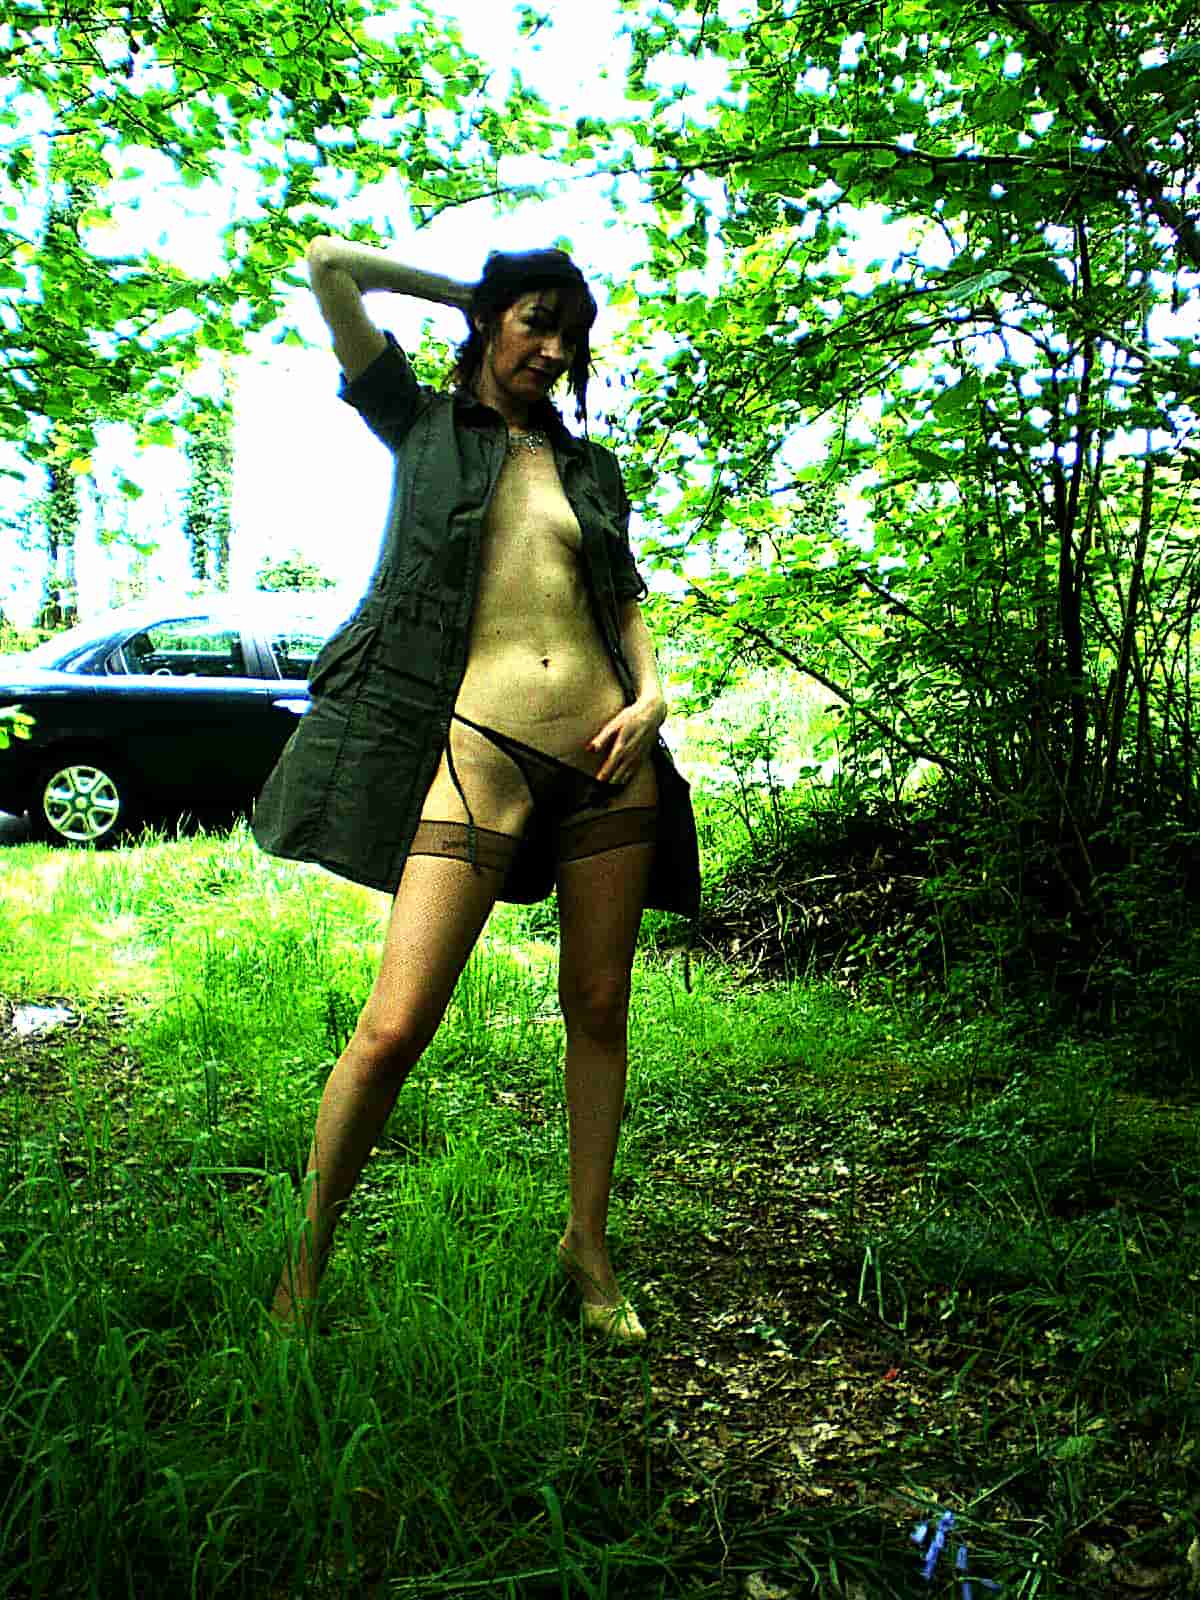 Let's take a walk in the woods bitch, and how does it feel to be spurted inside the ass?